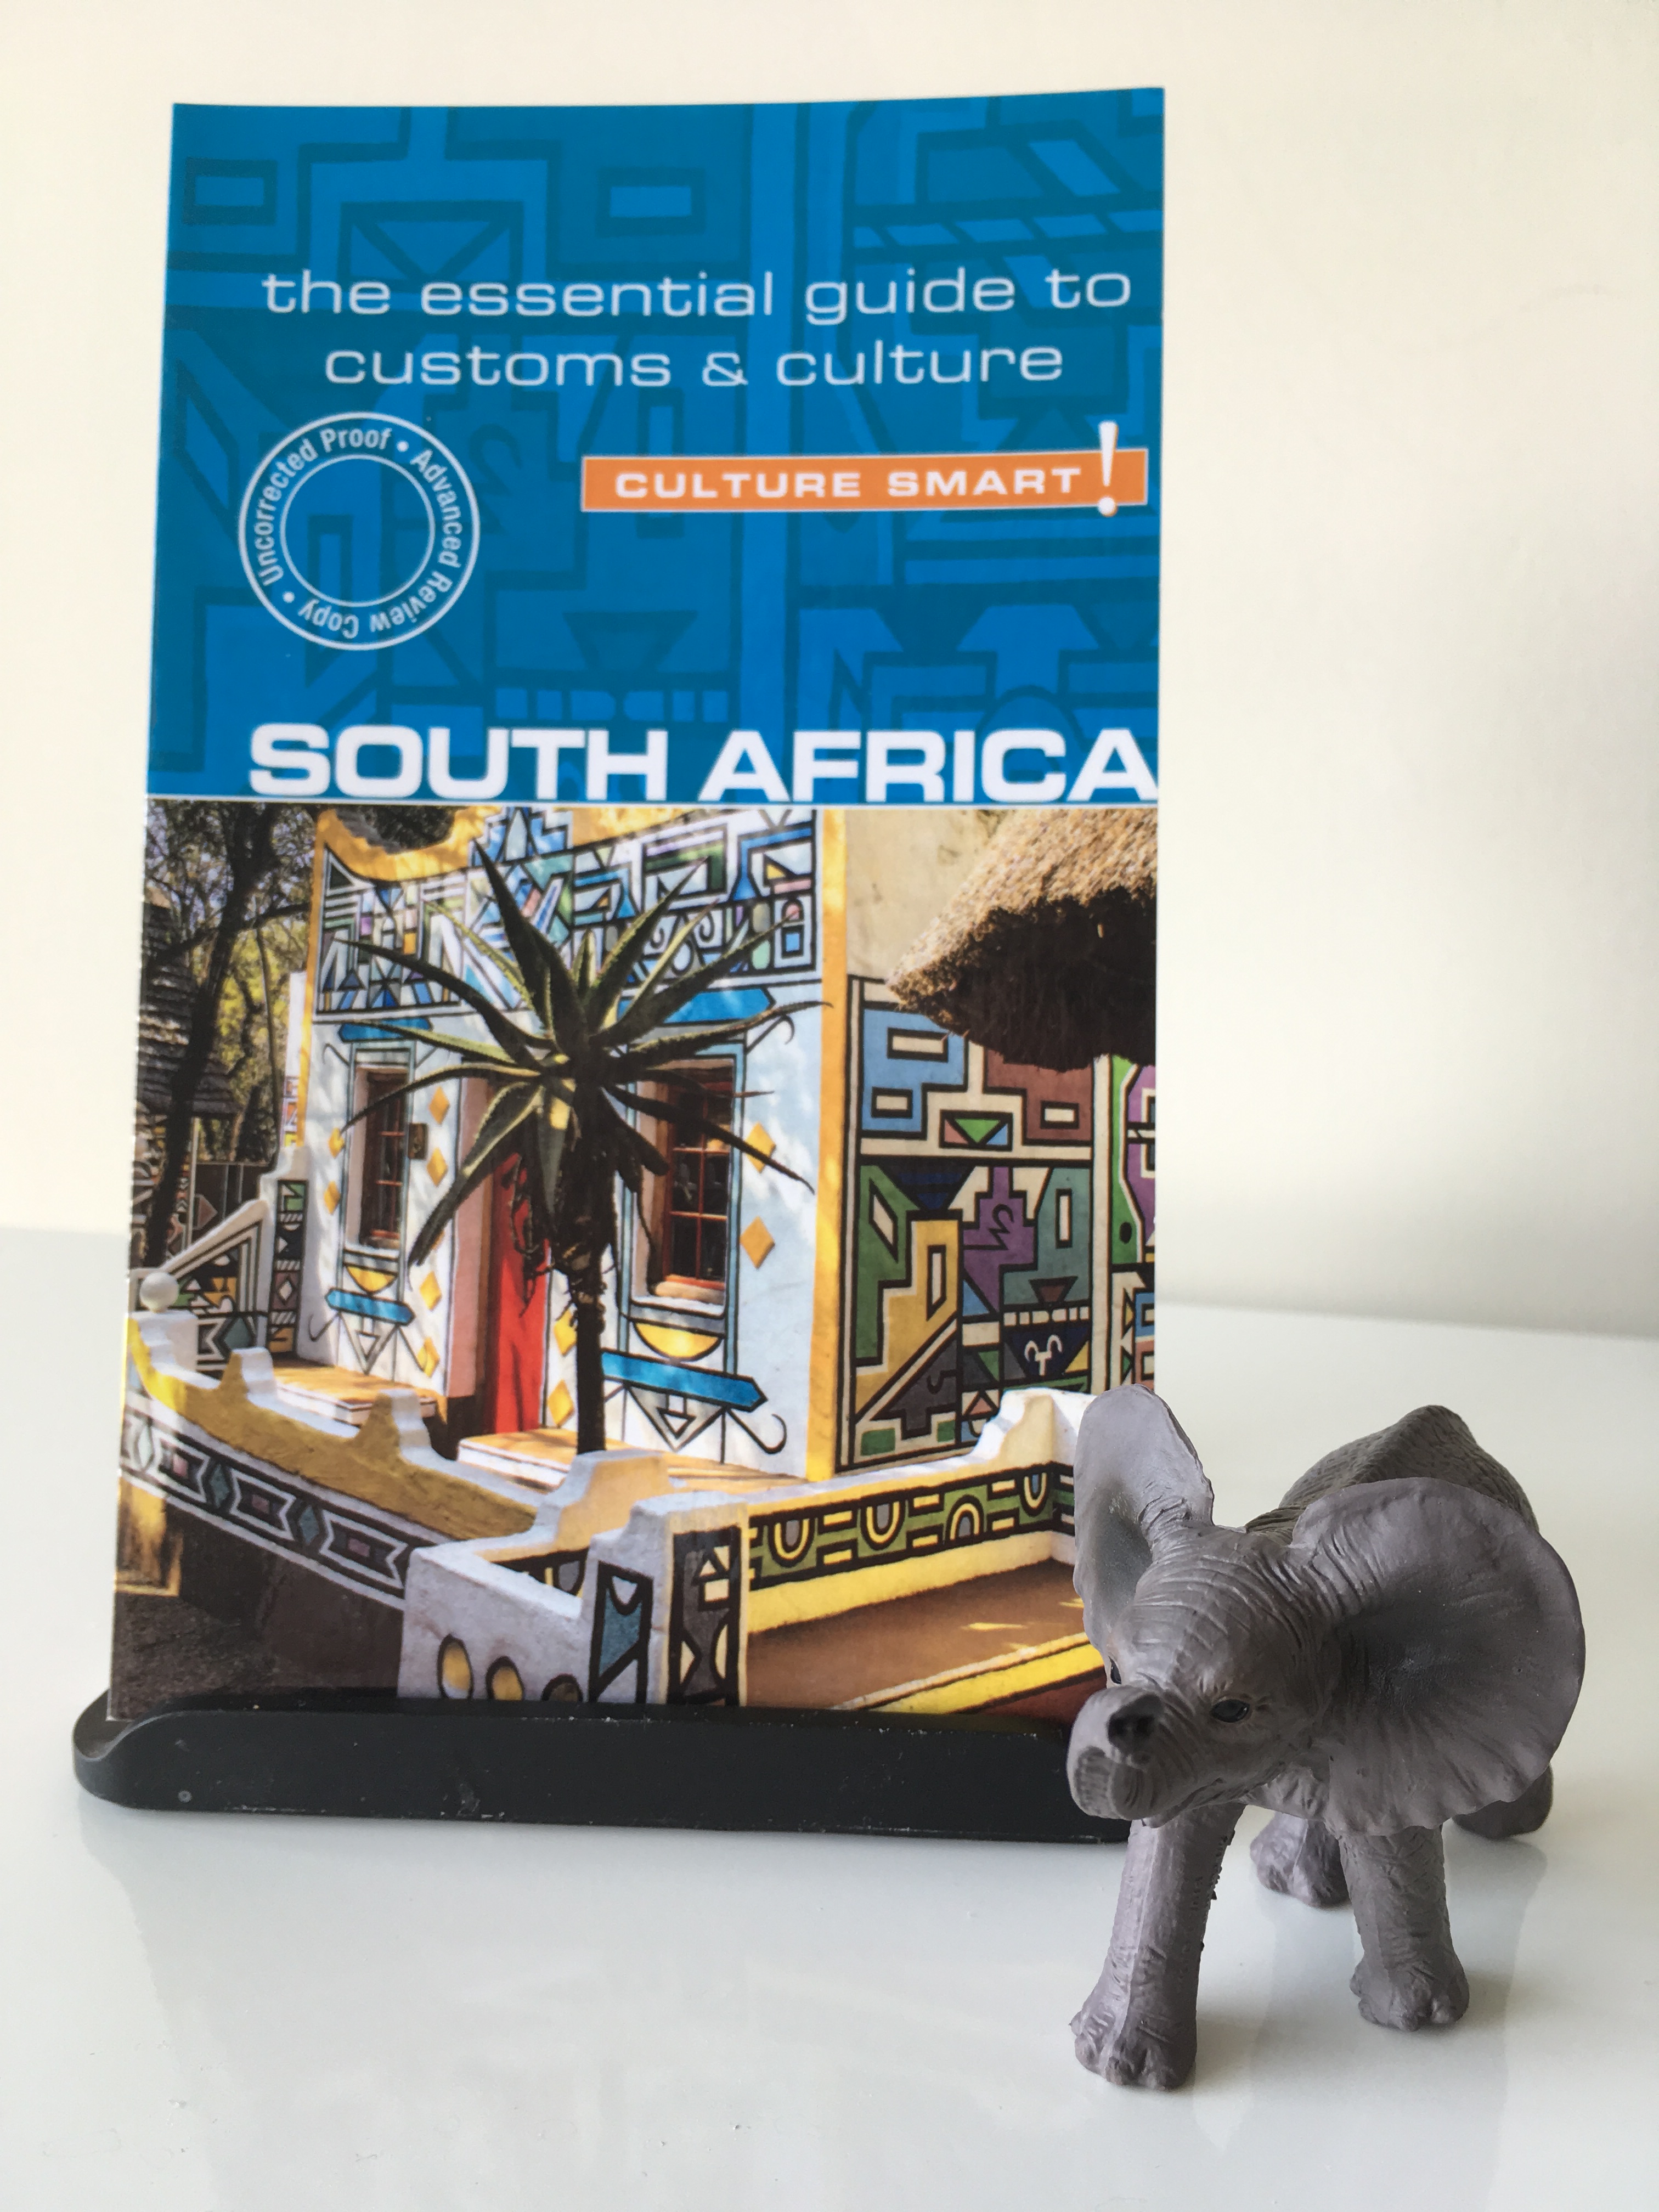 Culture Smart South Africa Expat Book Giveaway Competition.